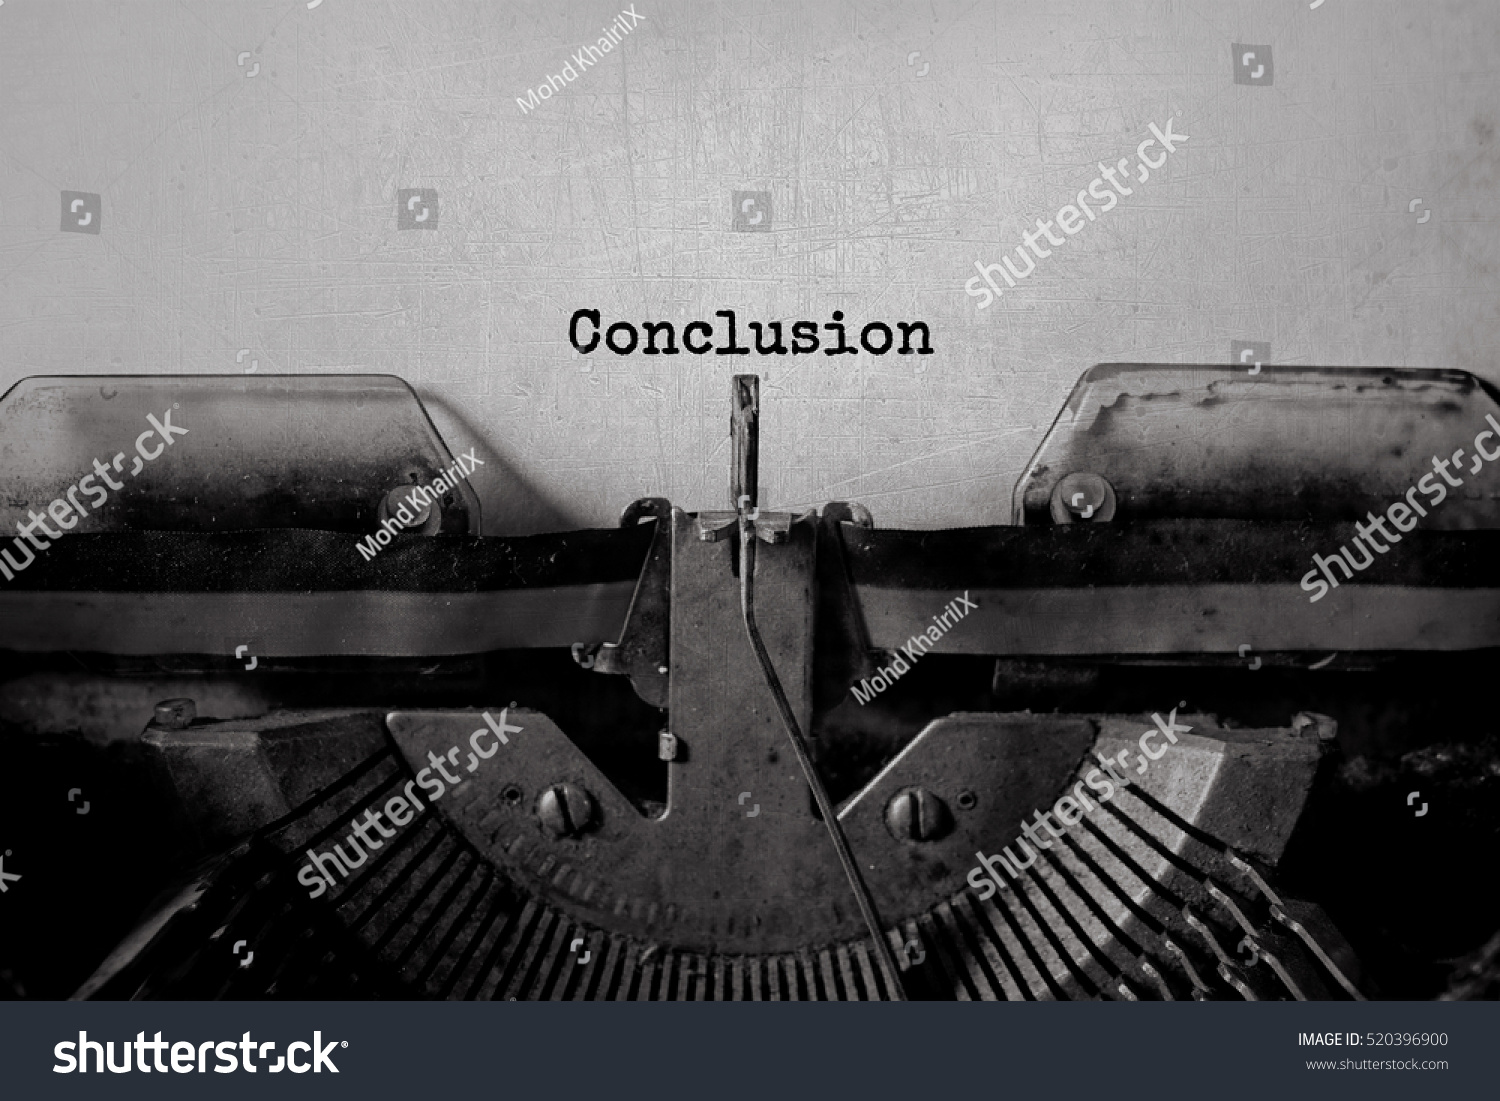 Conclusion typed words on a Vintage Typewriter.  #520396900